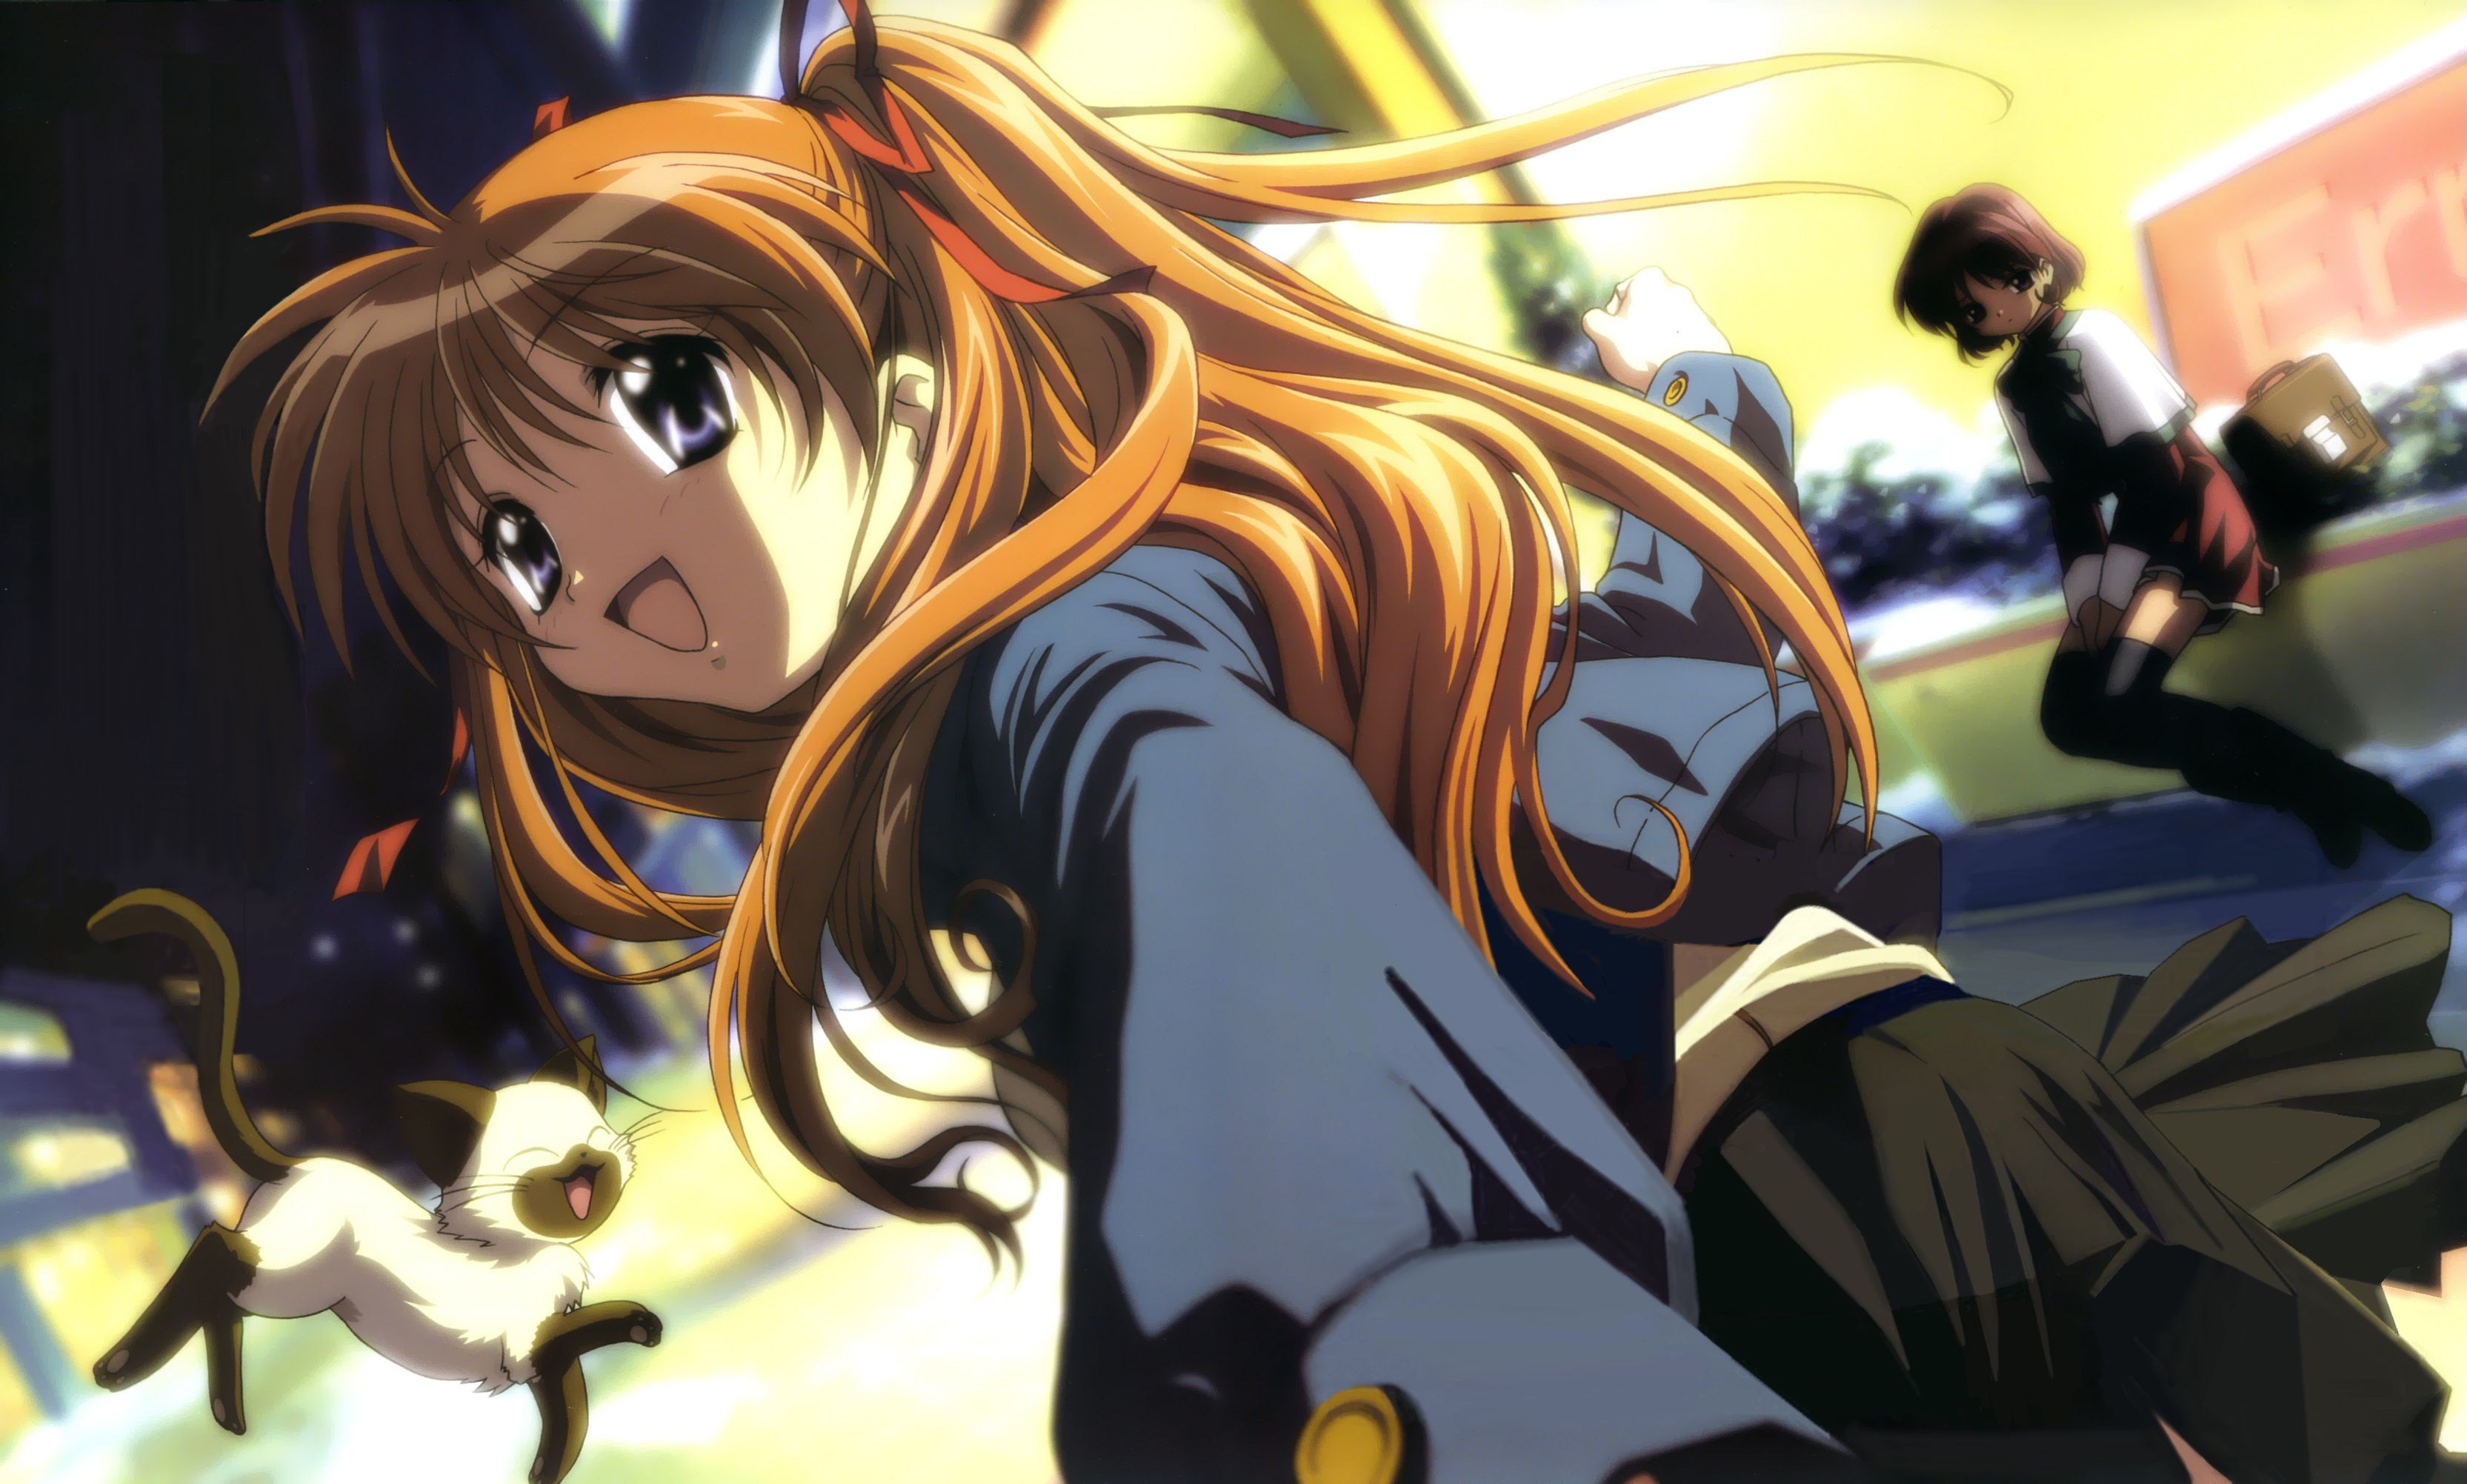 Anime 3330x2003 anime girls anime open mouth long hair two women cats animals